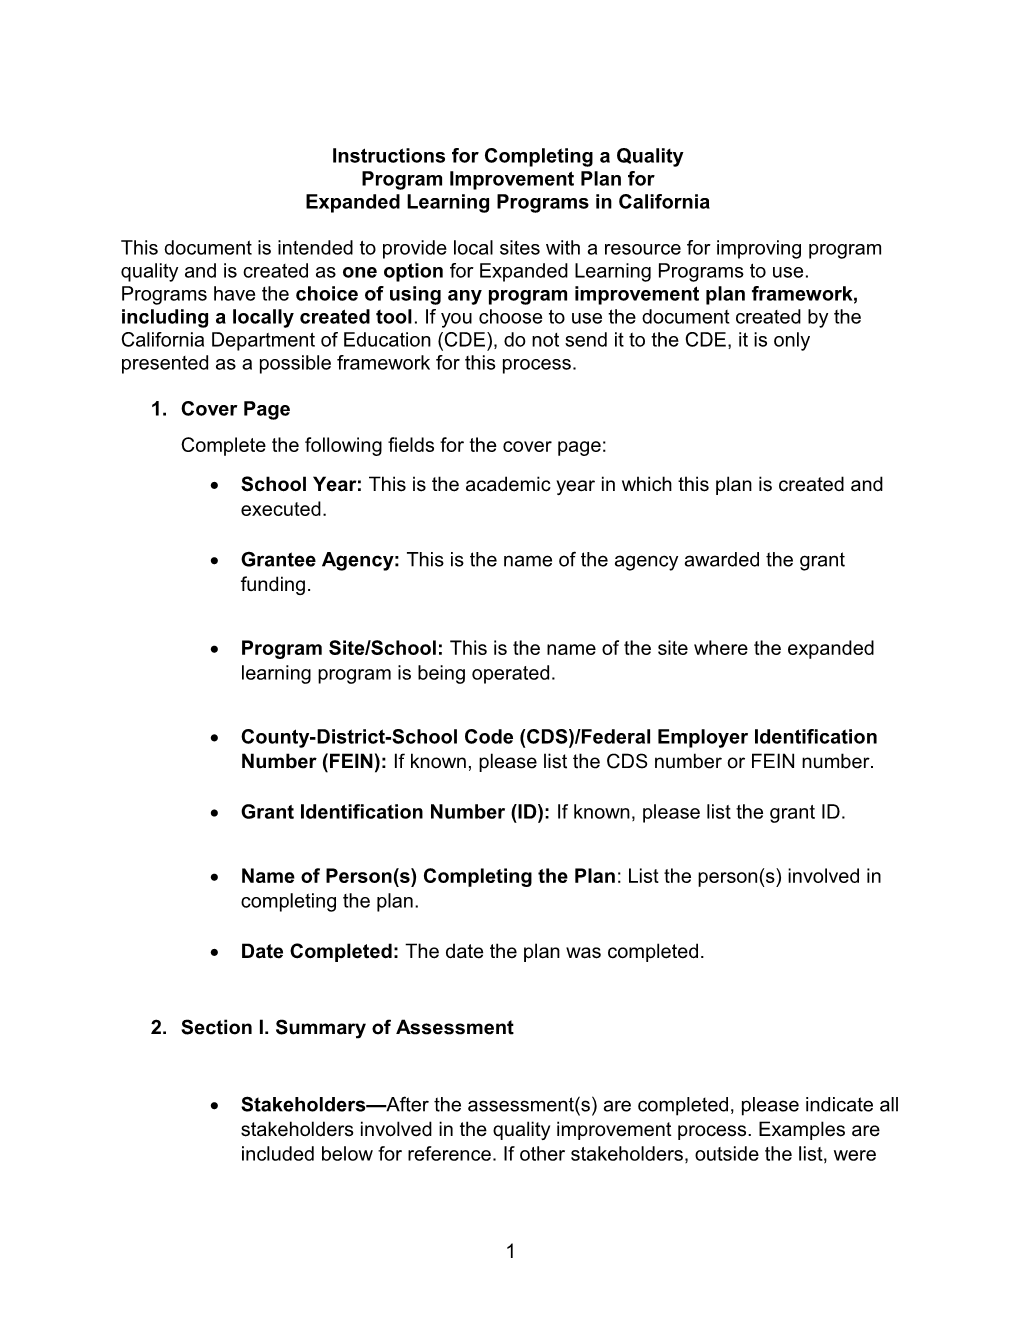 Expanded Learning - Quality Improvement Plan Instructions (CA Dept of Education)